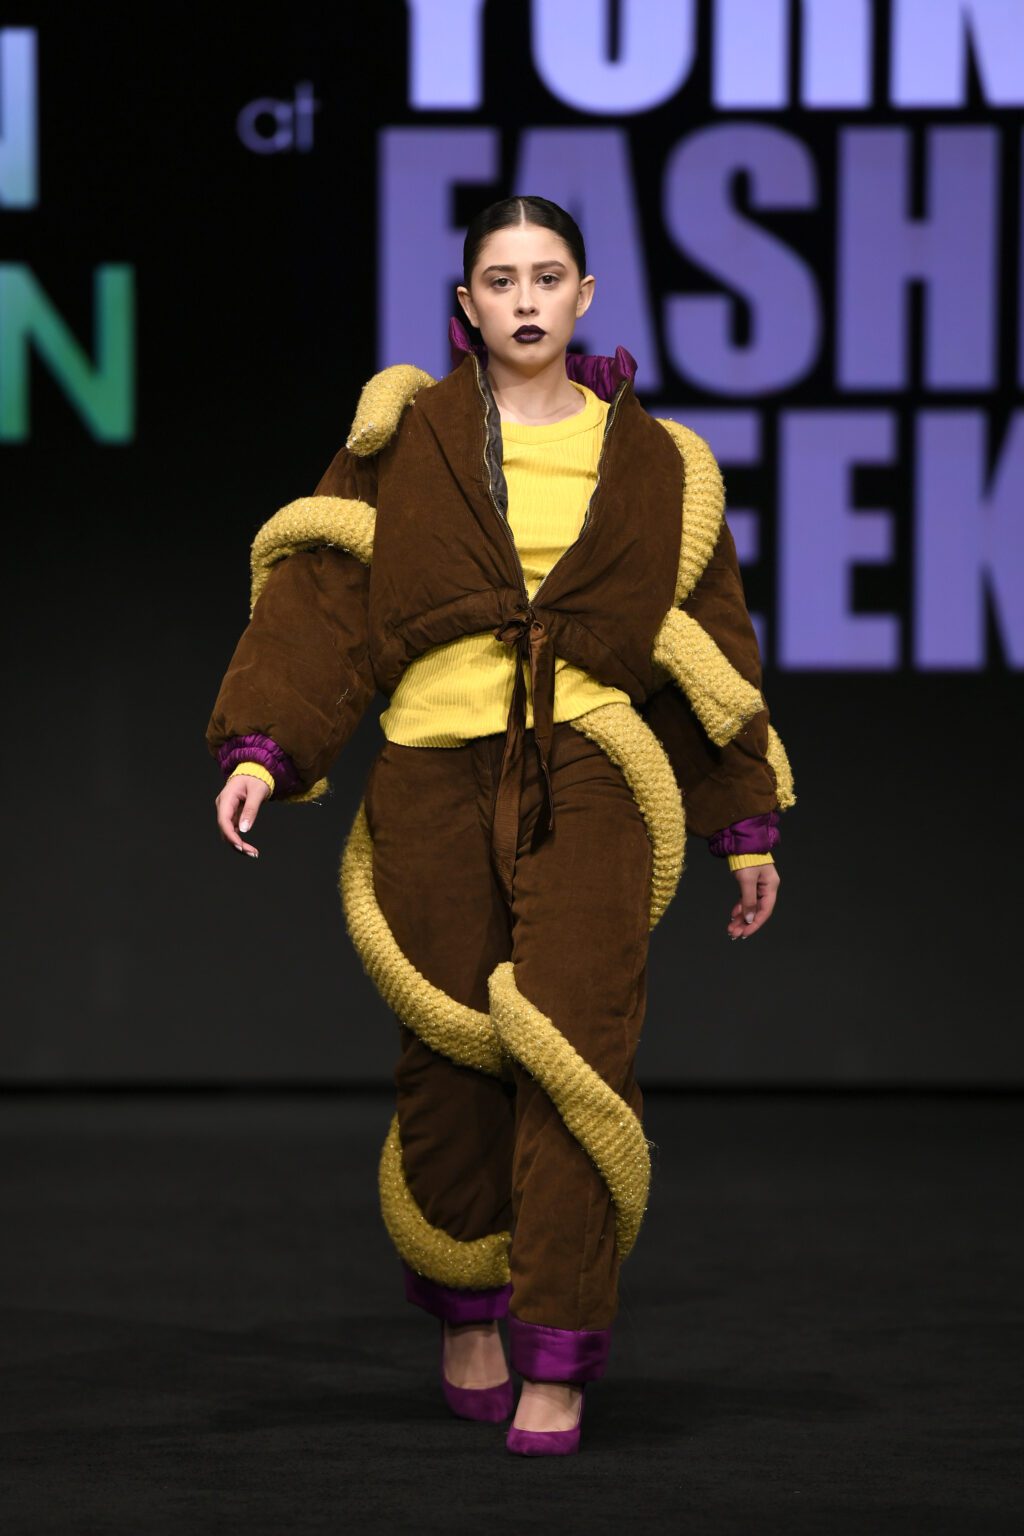 NEW YORK, NEW YORK - FEBRUARY 12: Alyssa Quintana walks the runway wearing INIFD-LST India Fashion Trunk - At New York Fashion Week Powered By Art Hearts Fashion at The Ziegfeld Ballroom on February 12, 2022 in New York City. (Photo by Arun Nevader/Getty Images for Art Hearts Fashion)